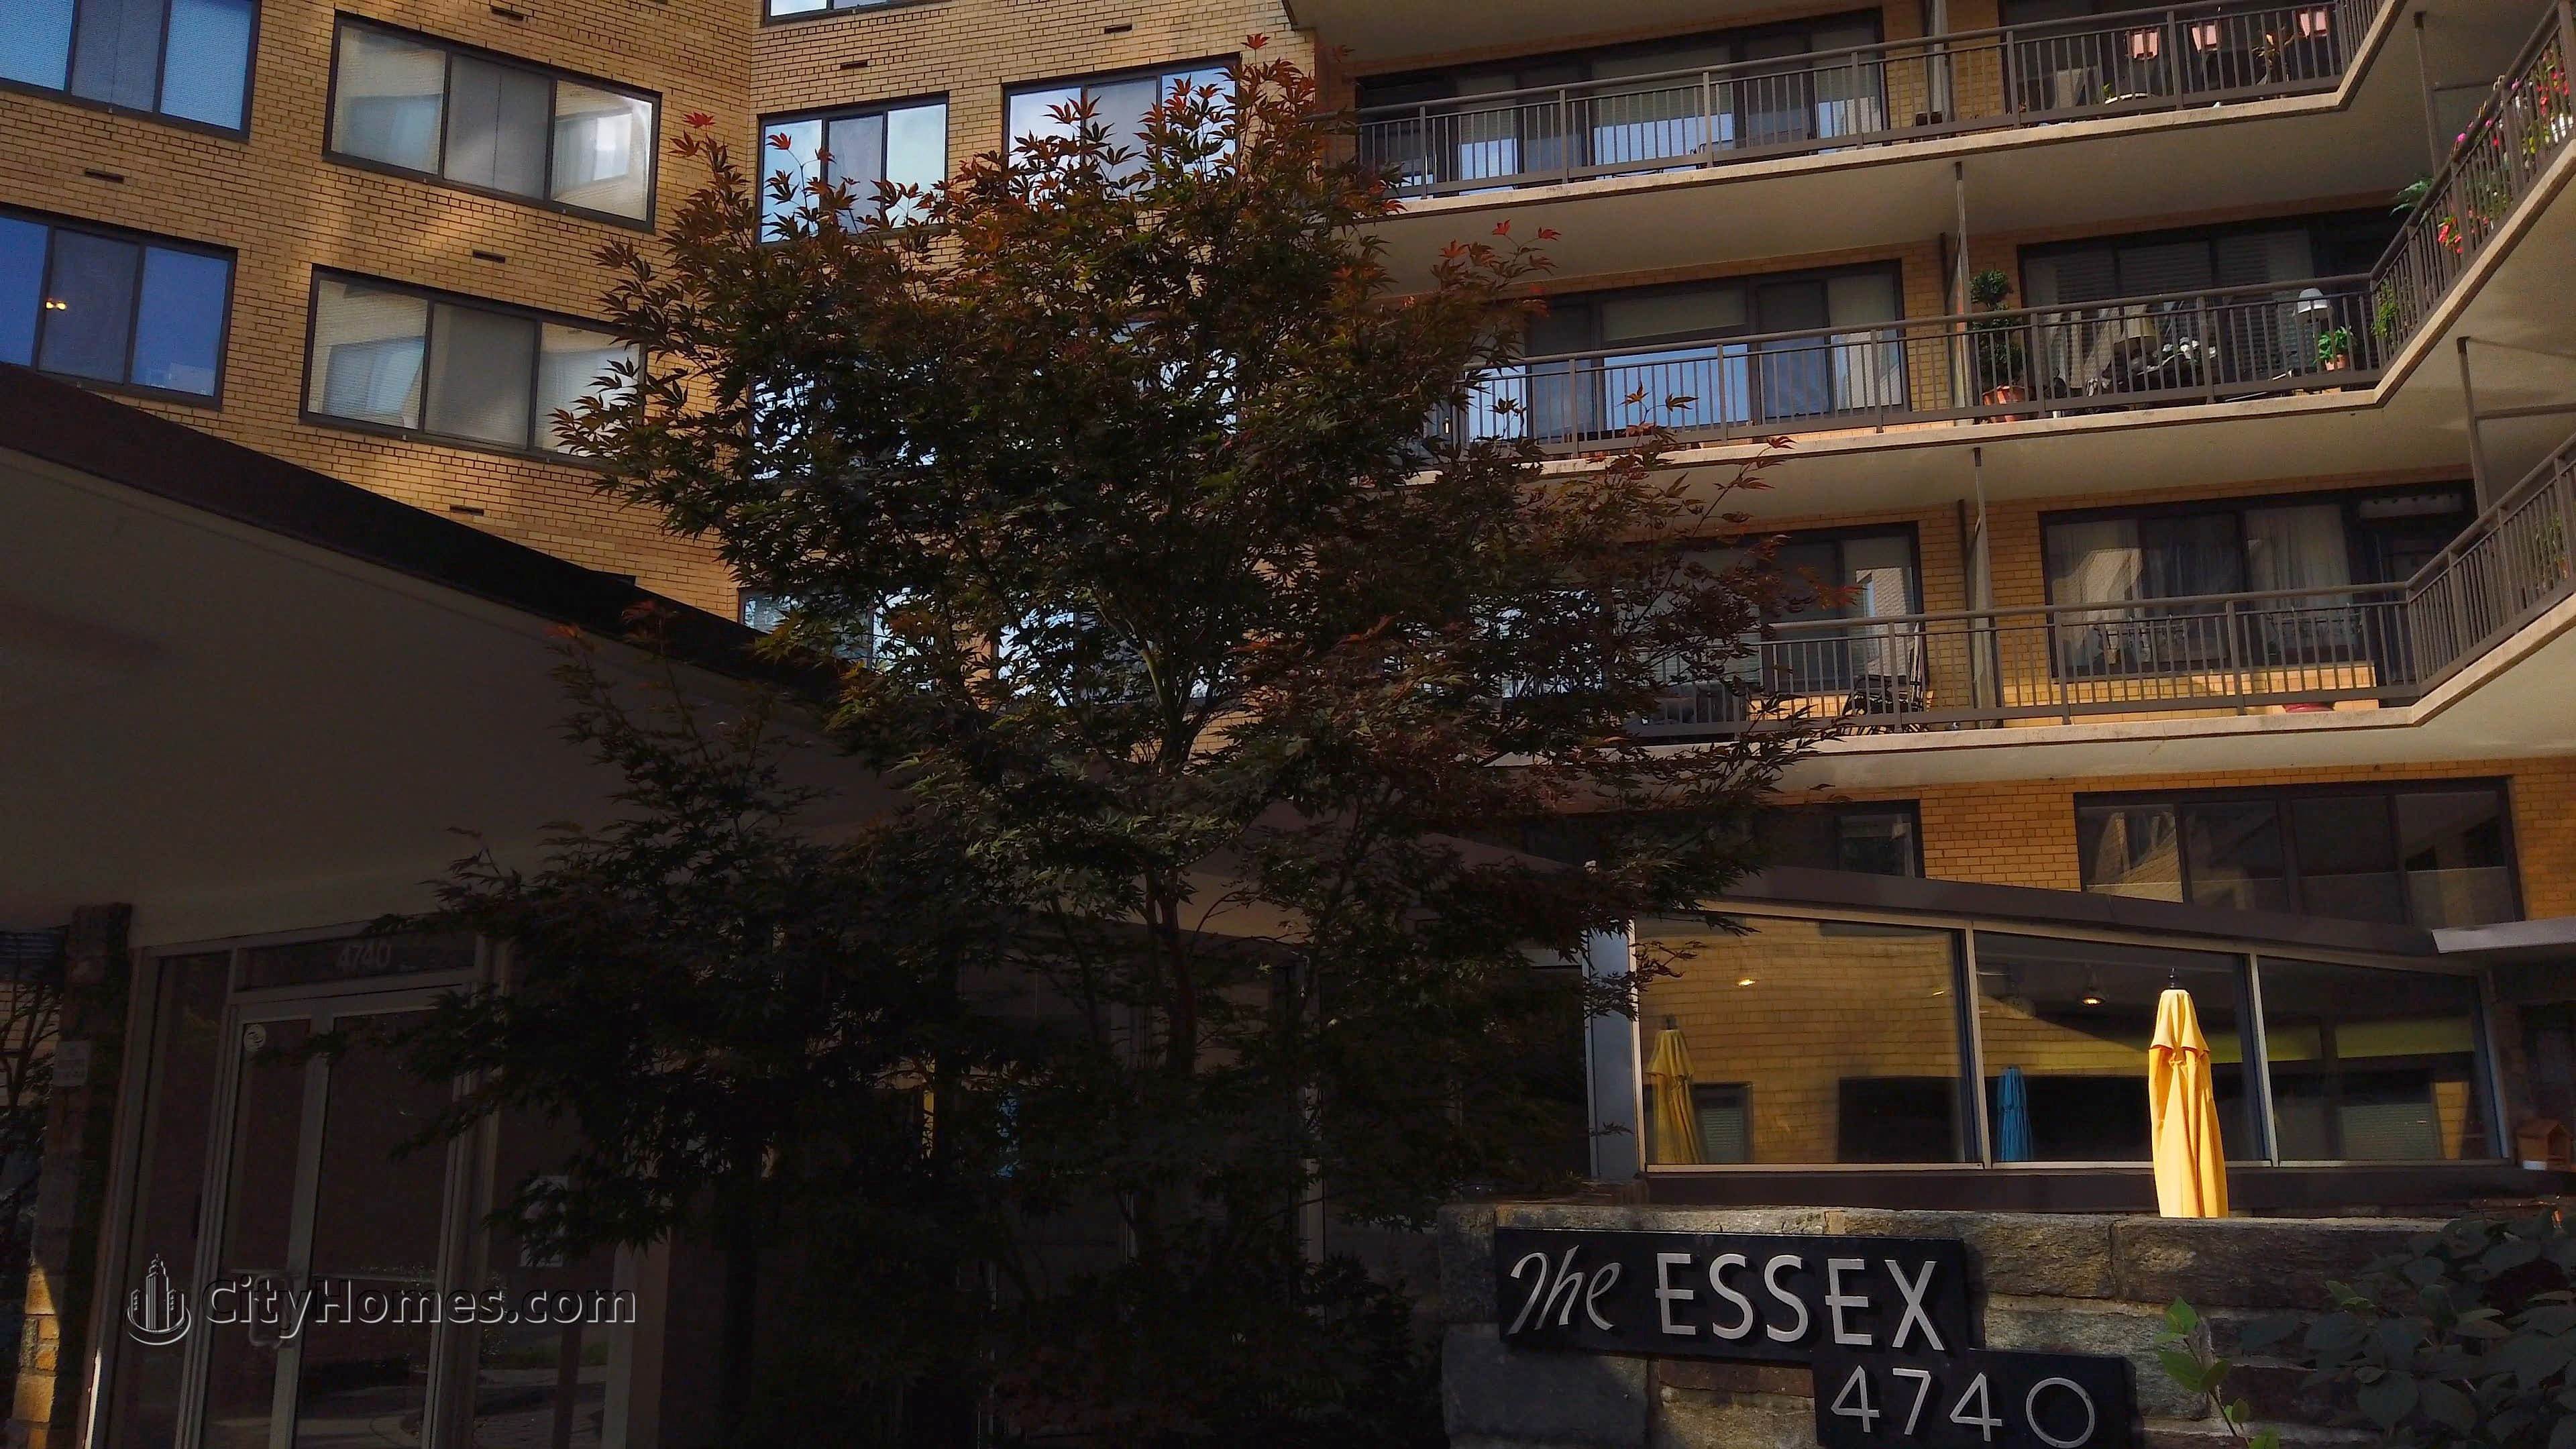 The Essex建於 4740 Connecticut Ave NW, Wakefield, Washington, DC 20008